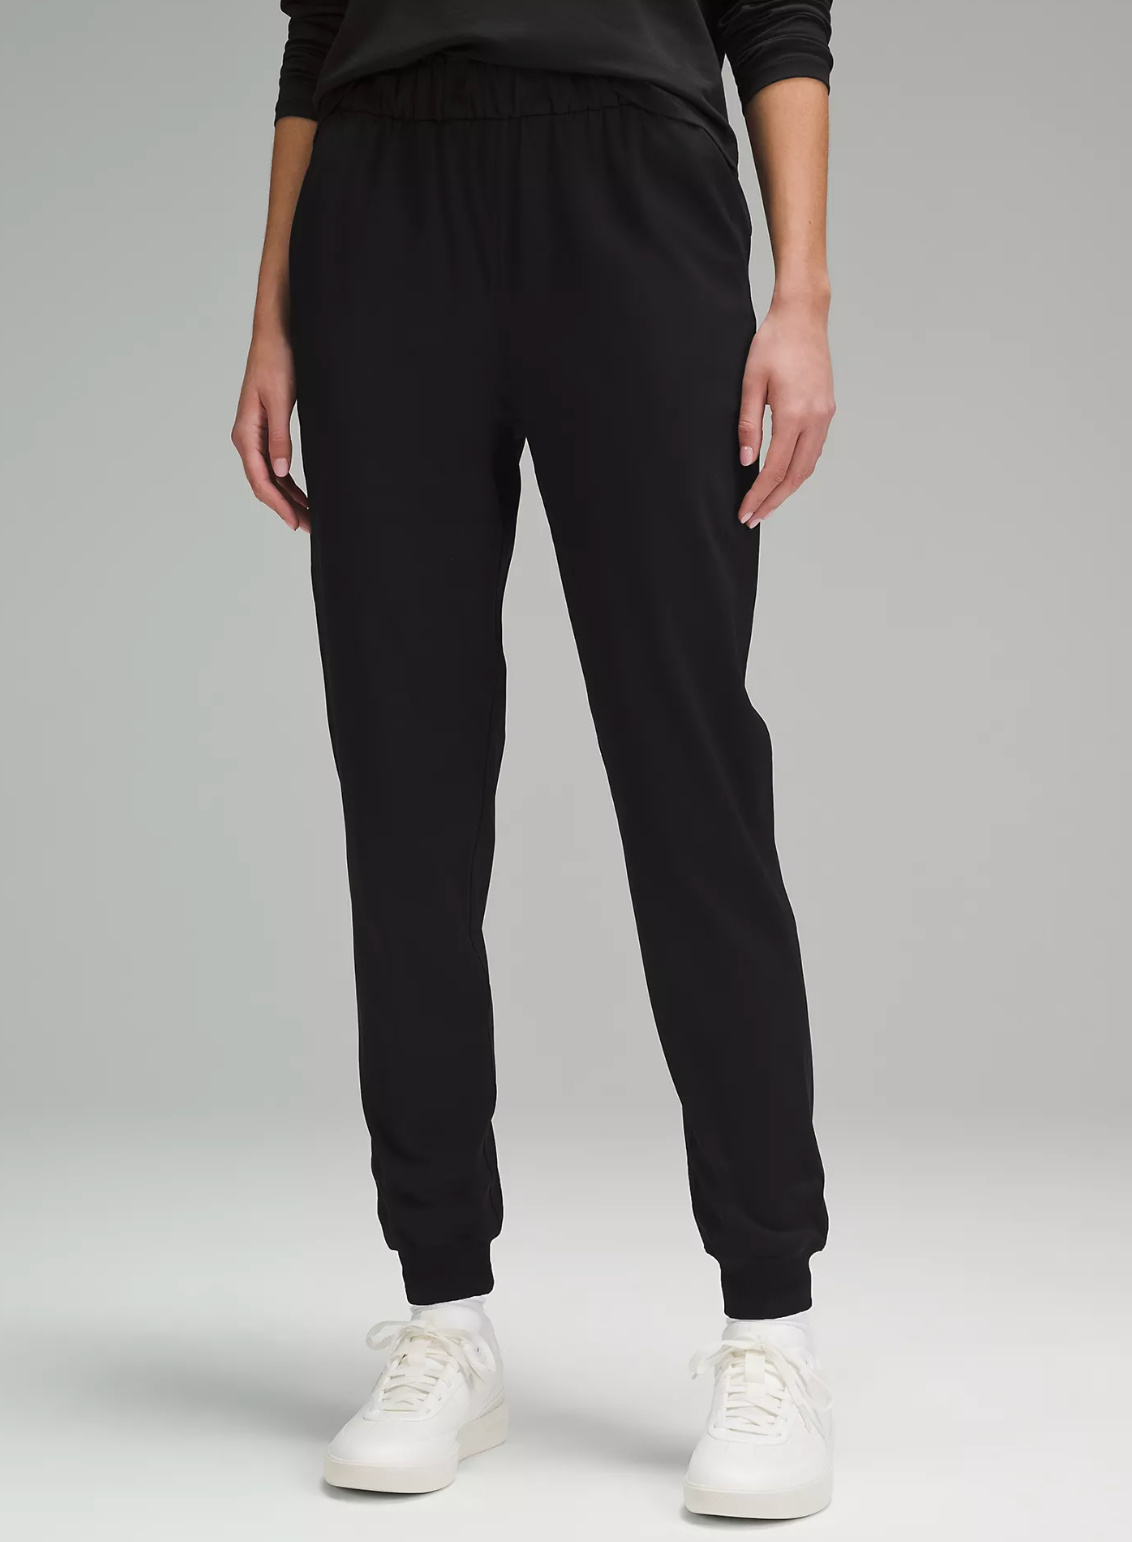 Womens Jogger Pants For Work